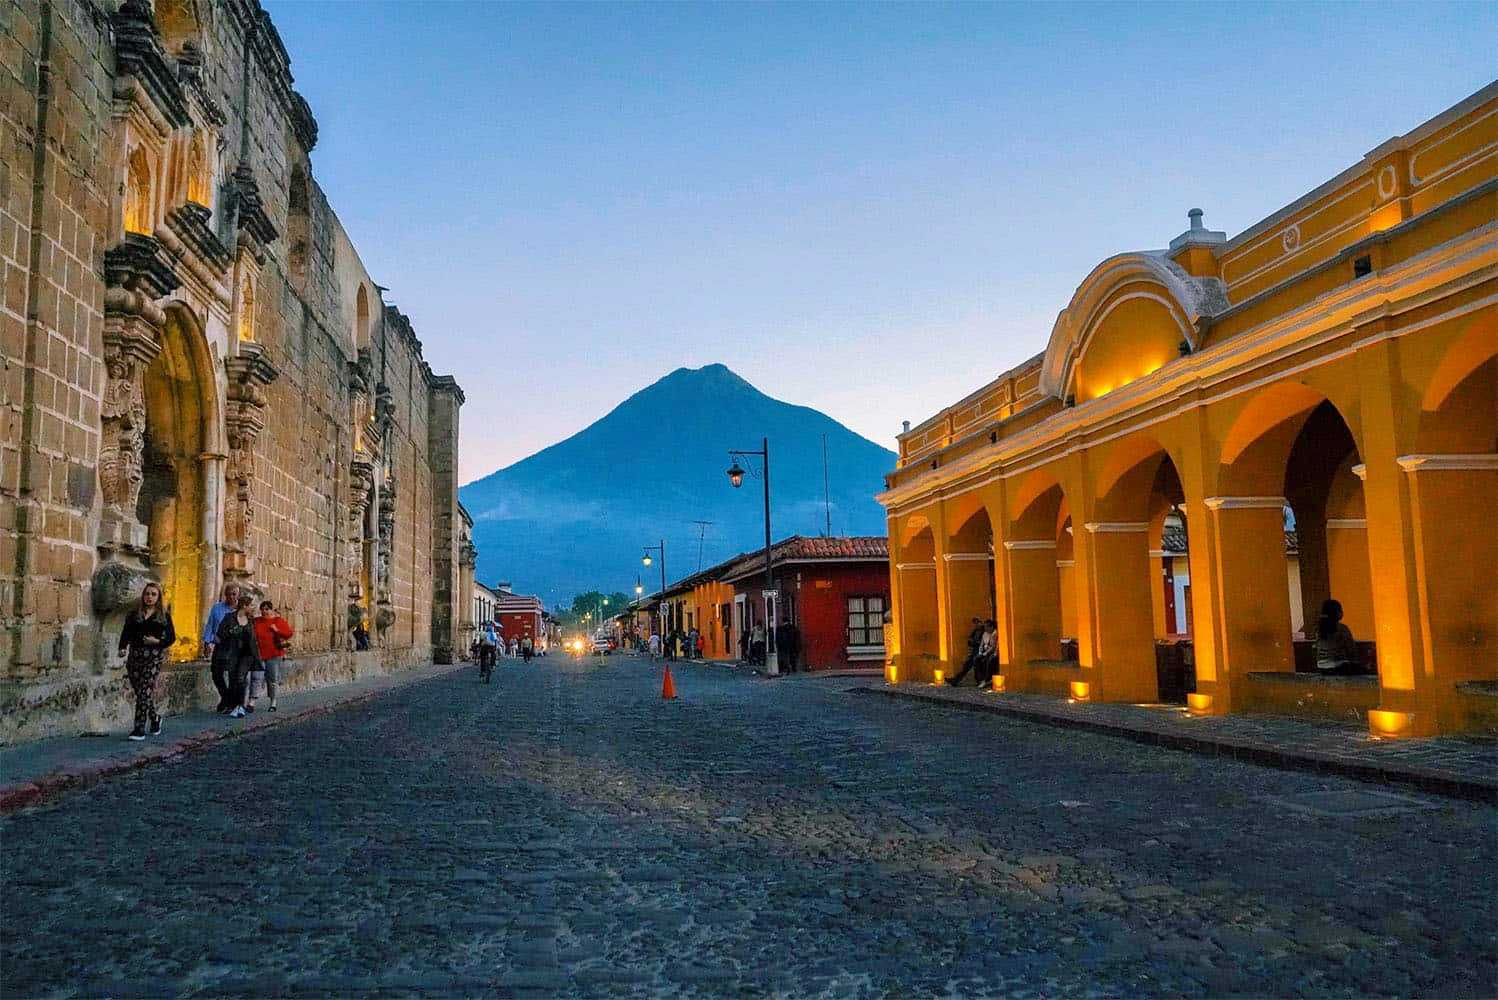 View of a volcano from a city center in Guatemala